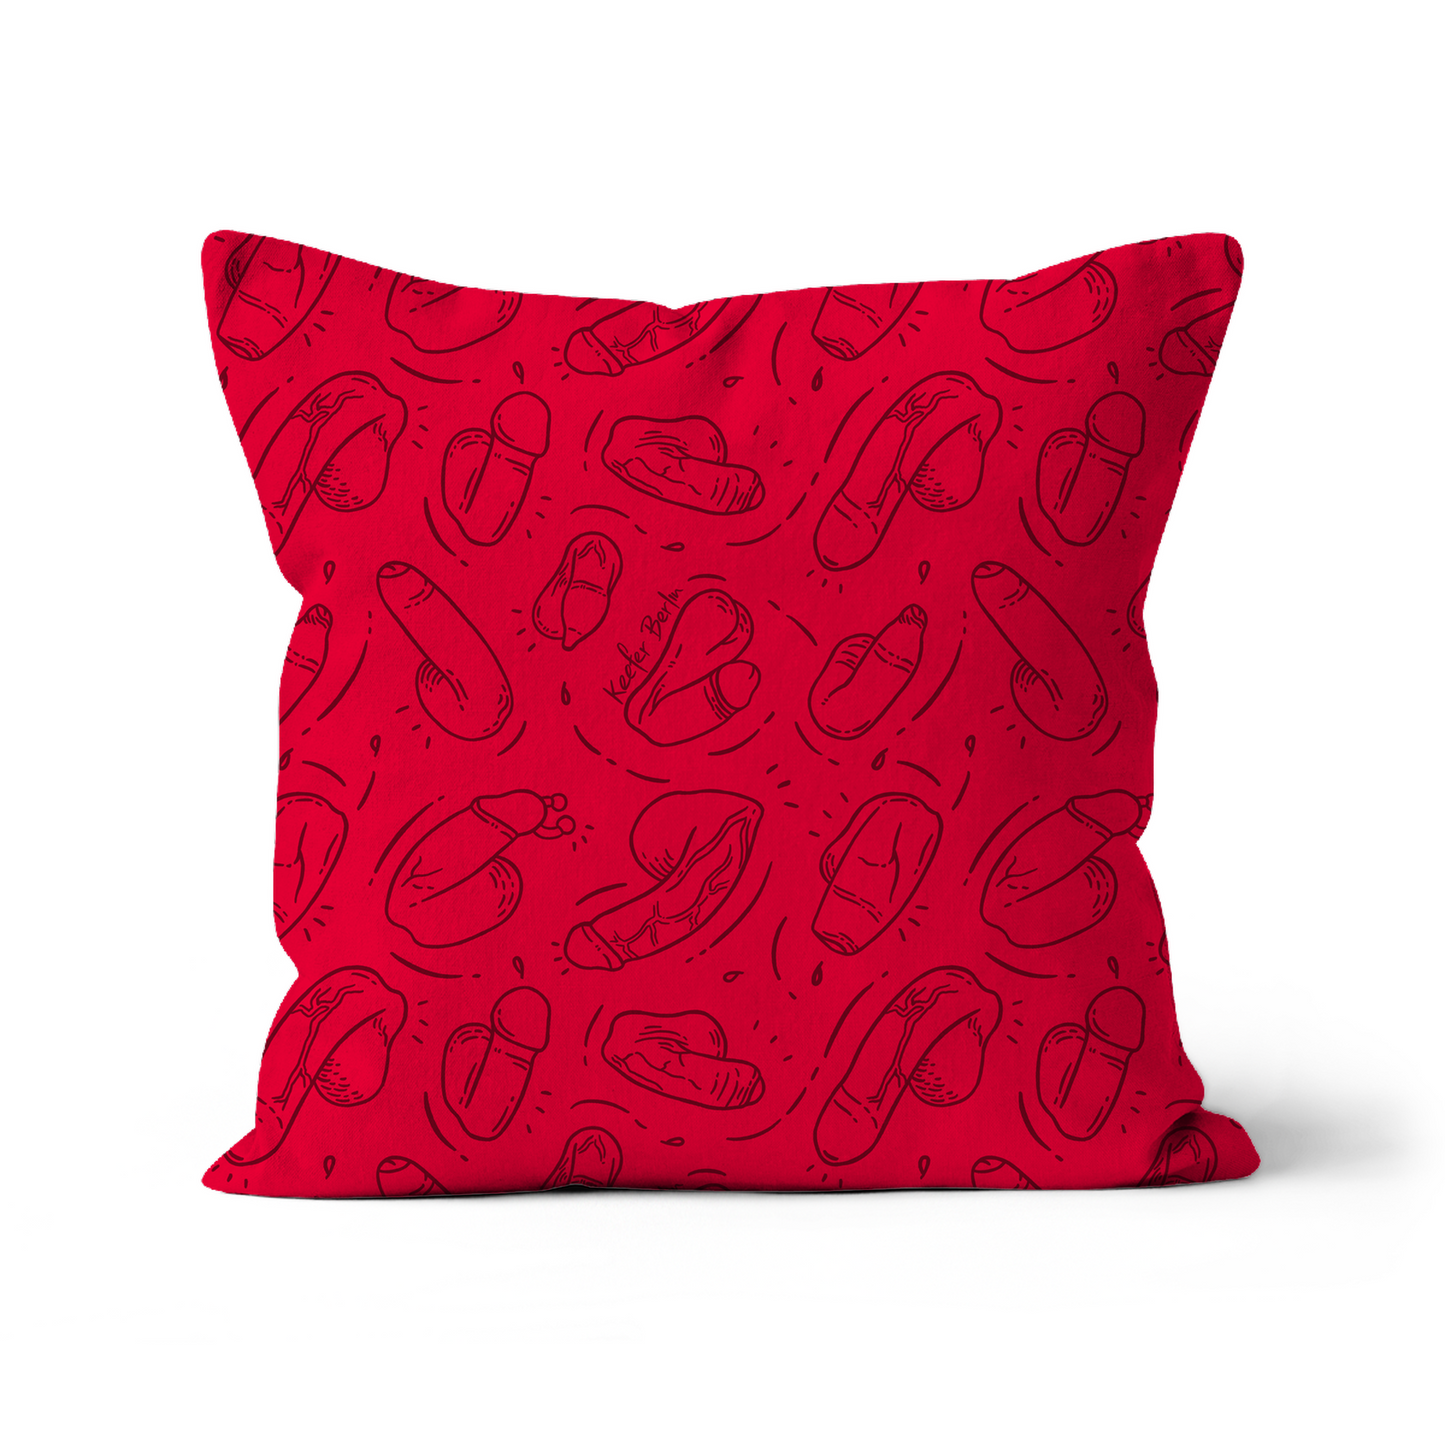 Dicklious (Red Edition) Throw Pillow With Insert